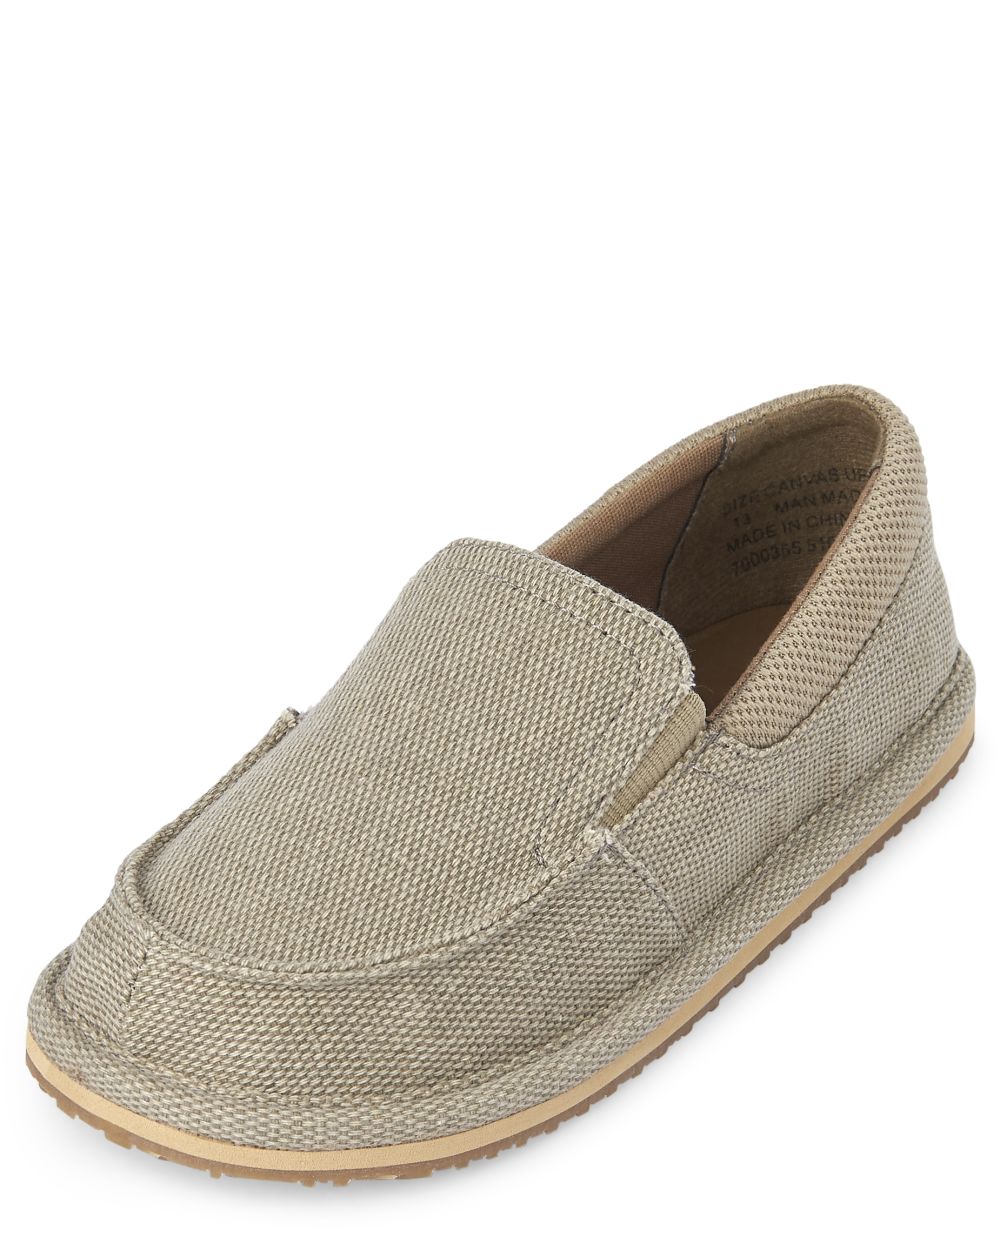 Boys Easter Matching Canvas Slip On Loafers